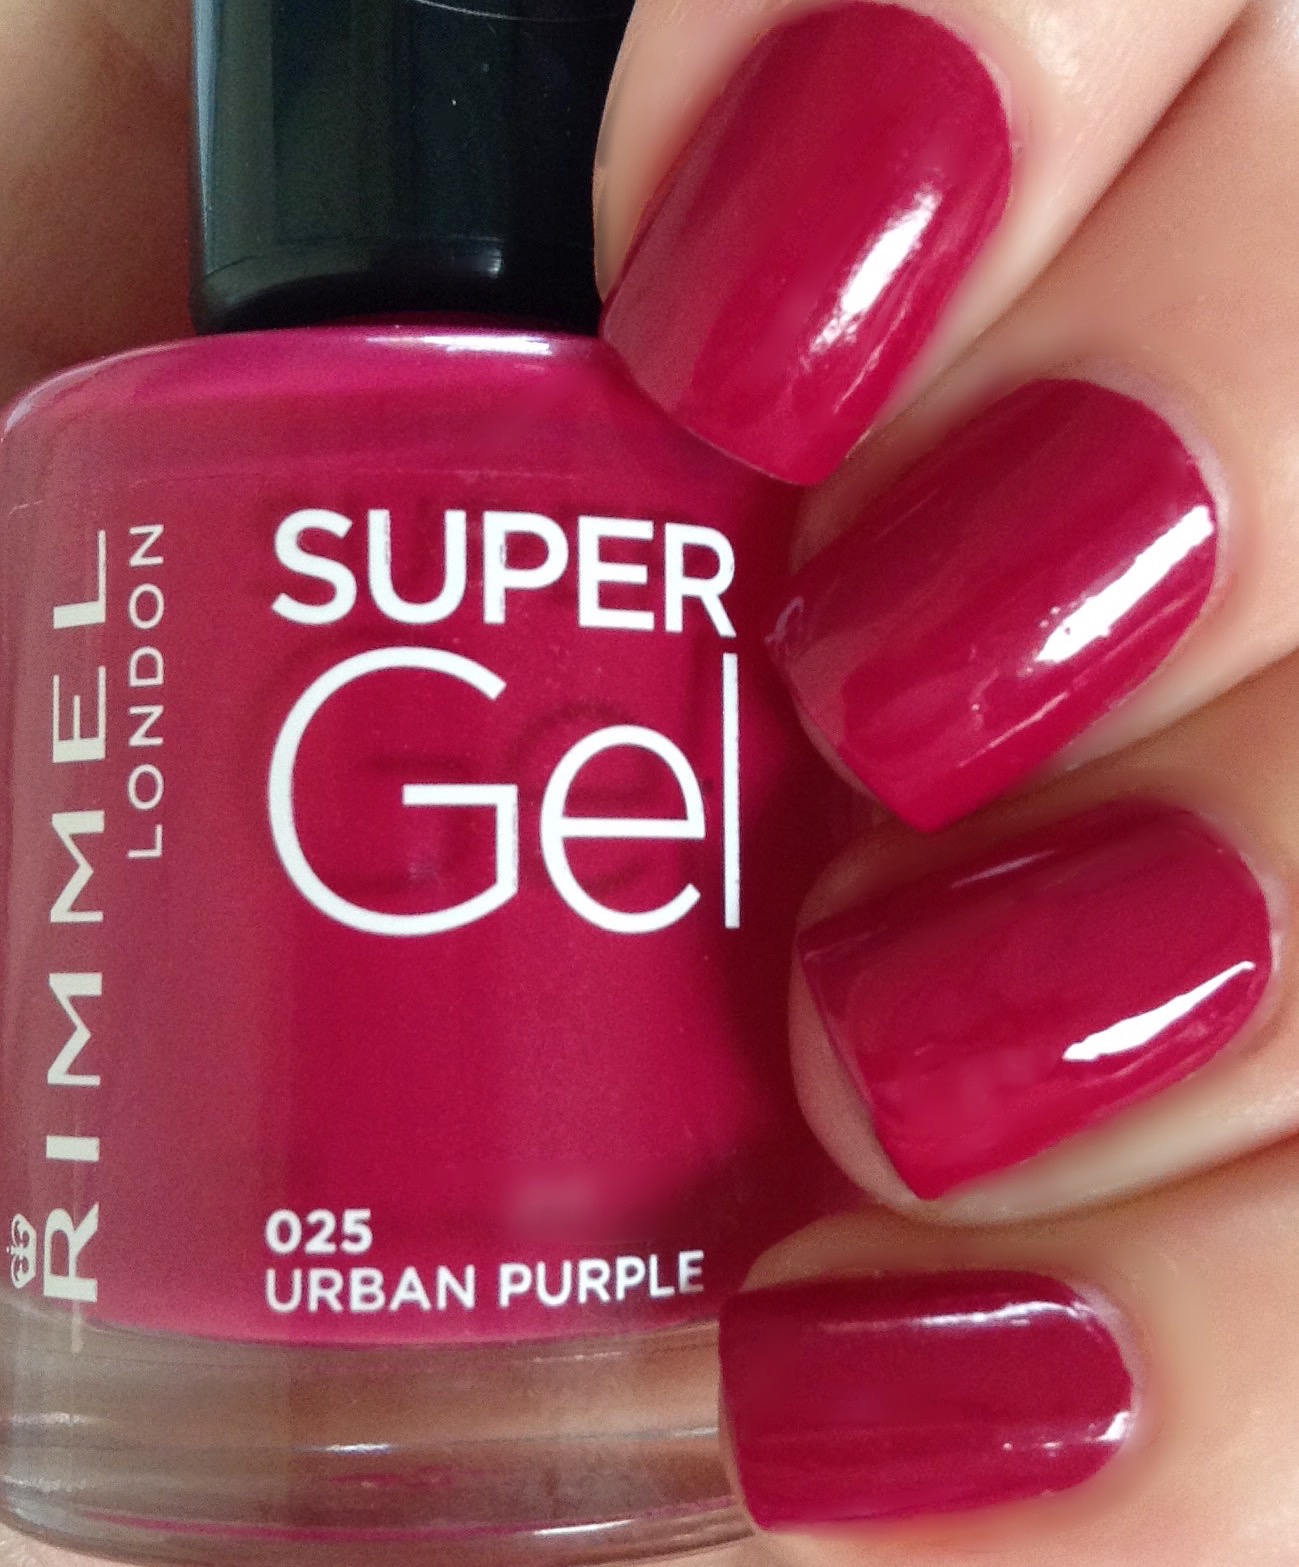 Don's Nail OBSESSION!: RIMMEL LONDON NEW SUPER GEL RANGE - SWATCHES & REVIEW